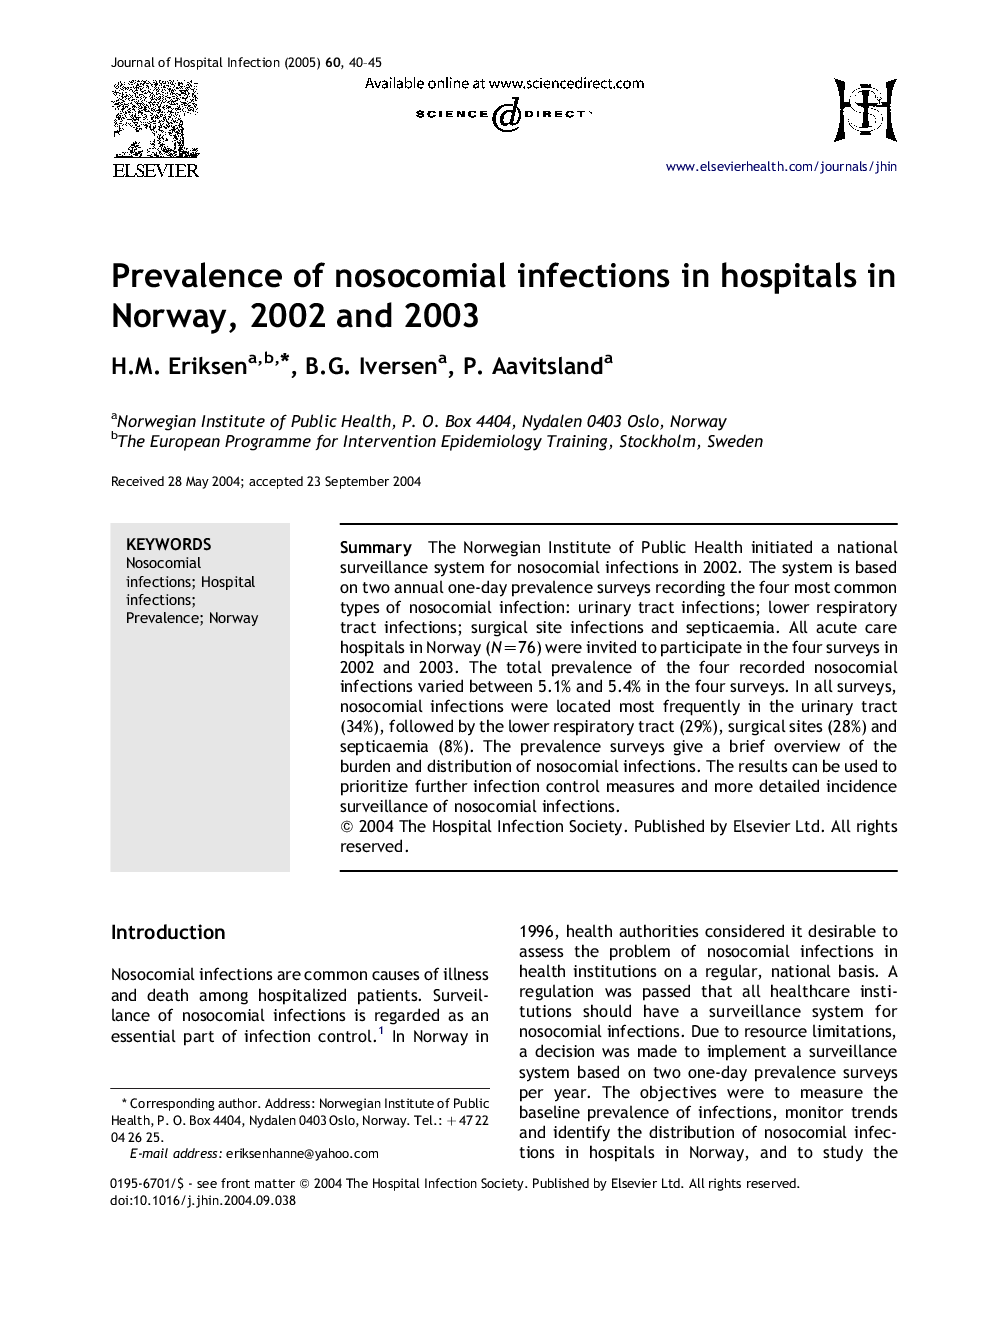 Prevalence of nosocomial infections in hospitals in Norway, 2002 and 2003